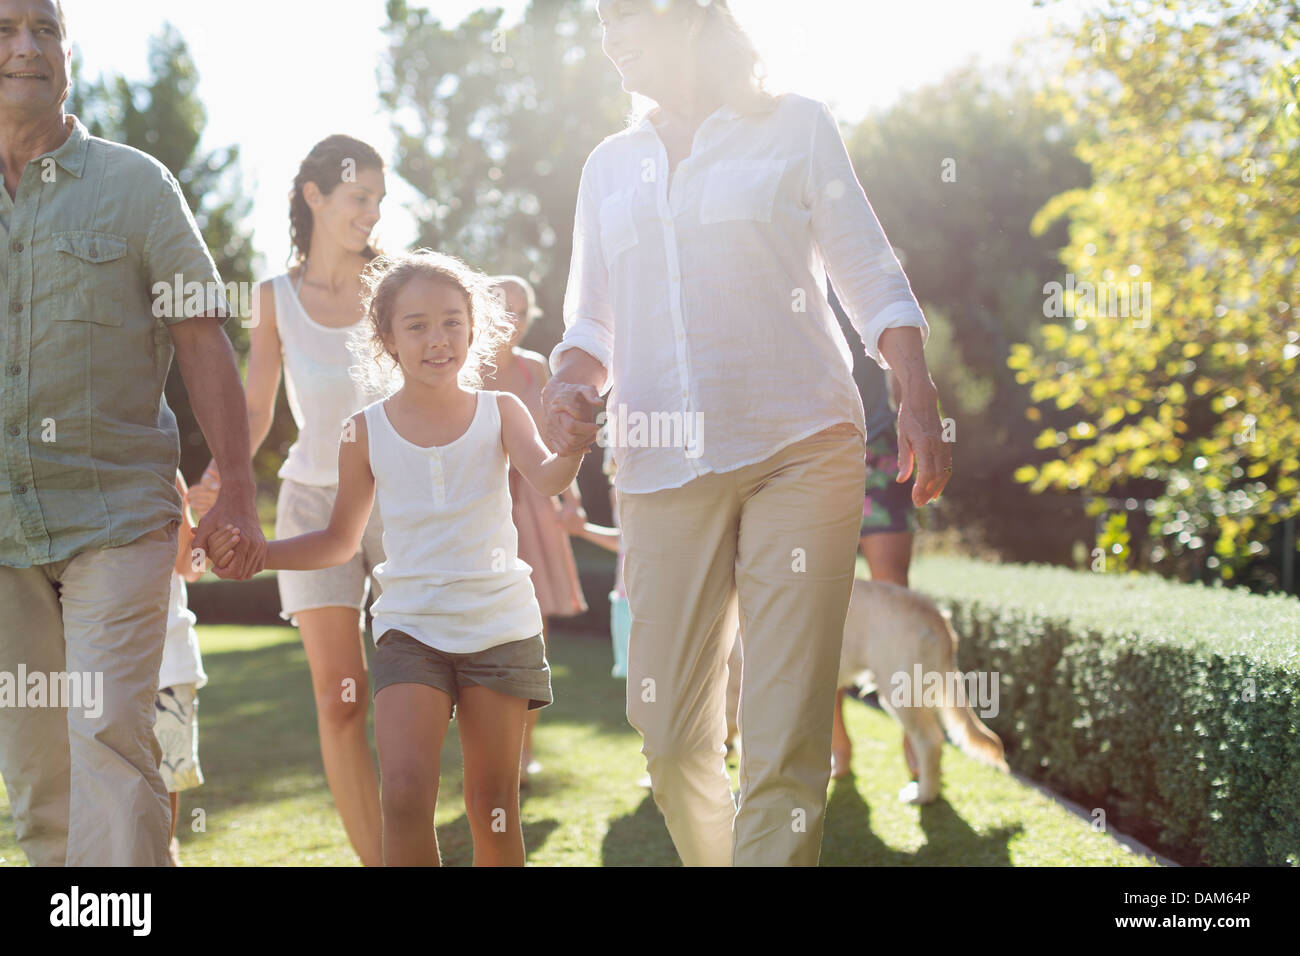 Family walking together in backyard Banque D'Images